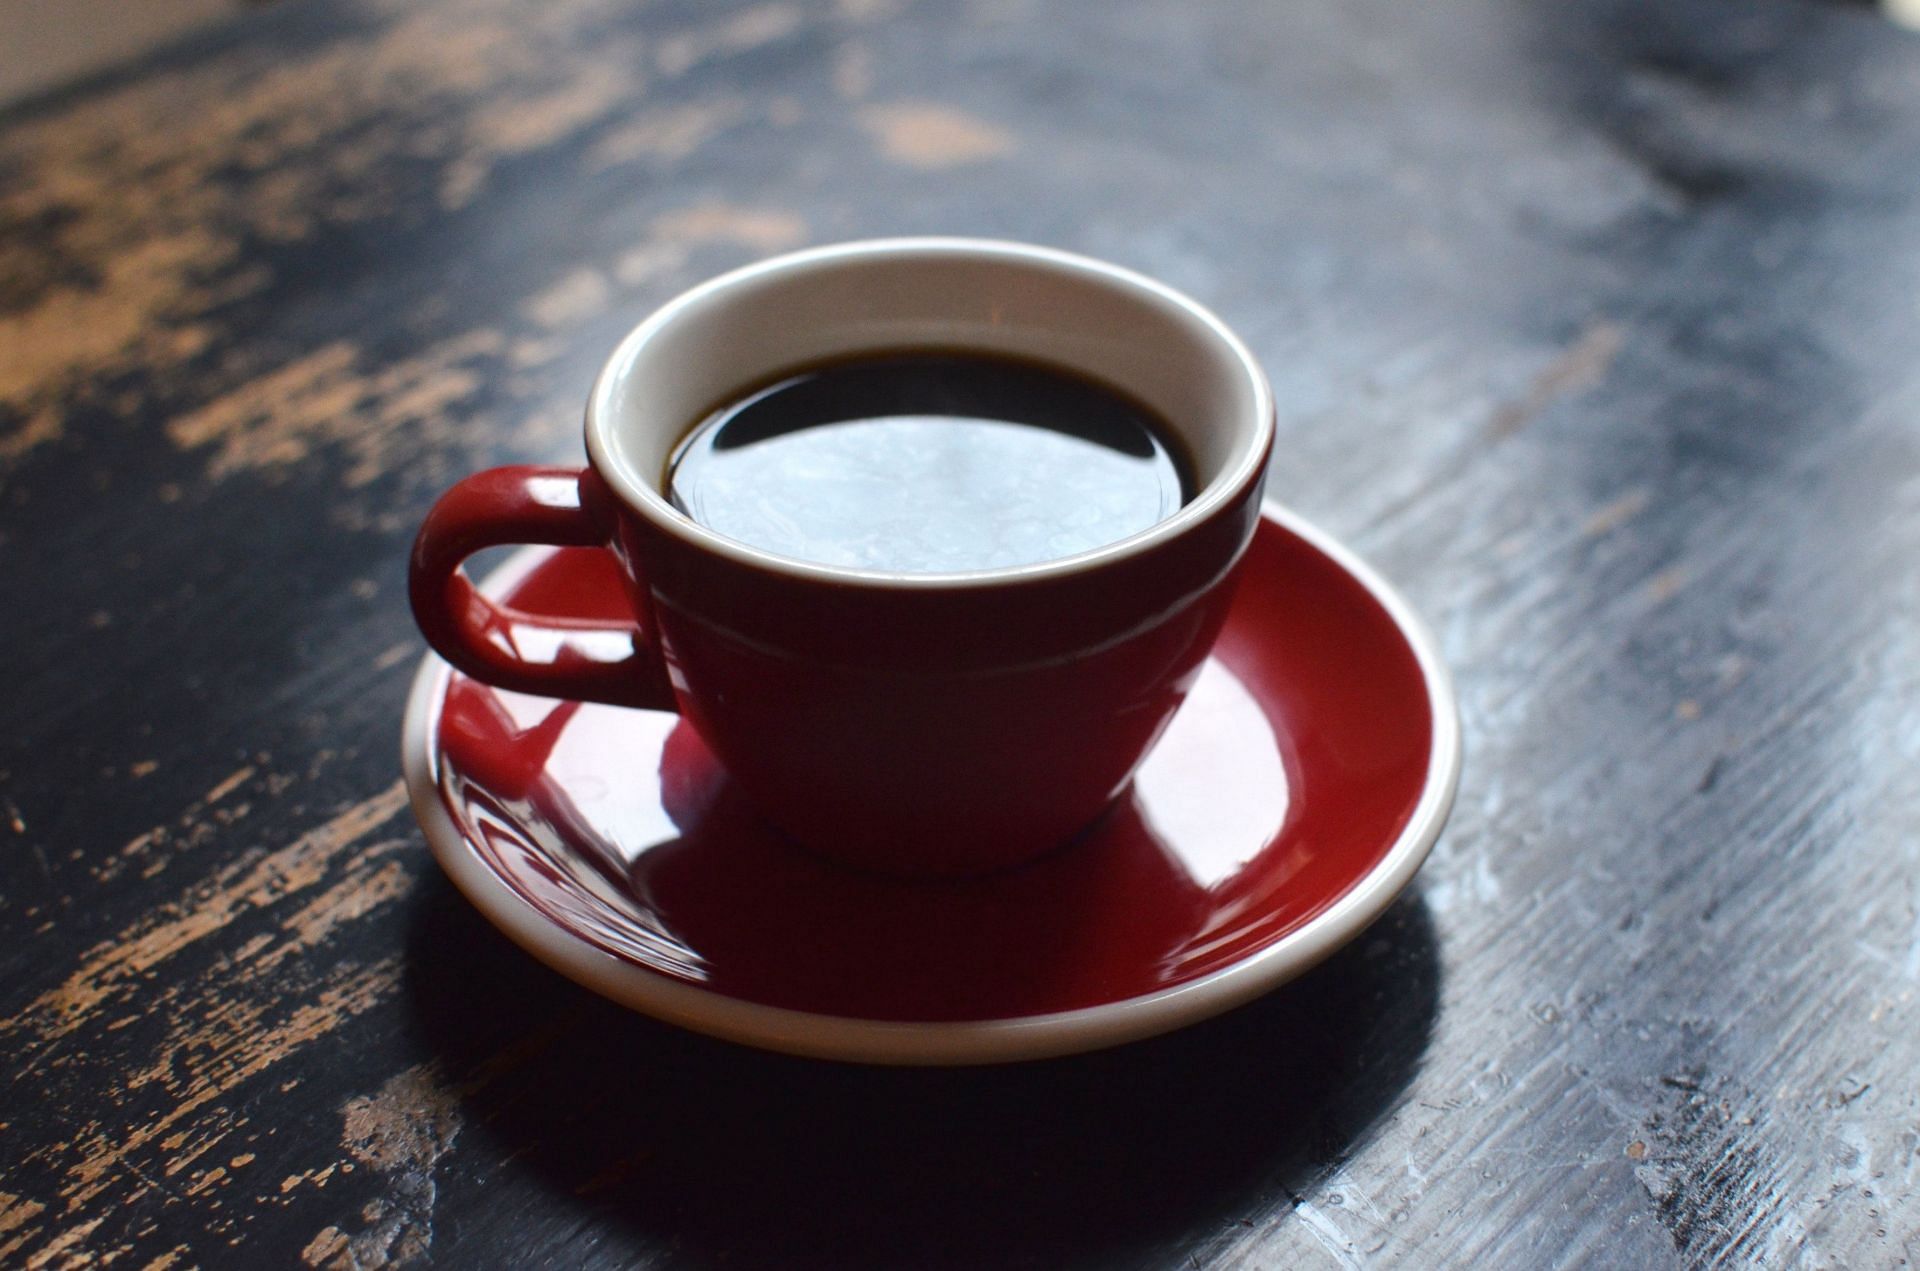 To get the complete benefits of black coffee it should be consumed without any additives (Image by Skylar Kang/pexels)